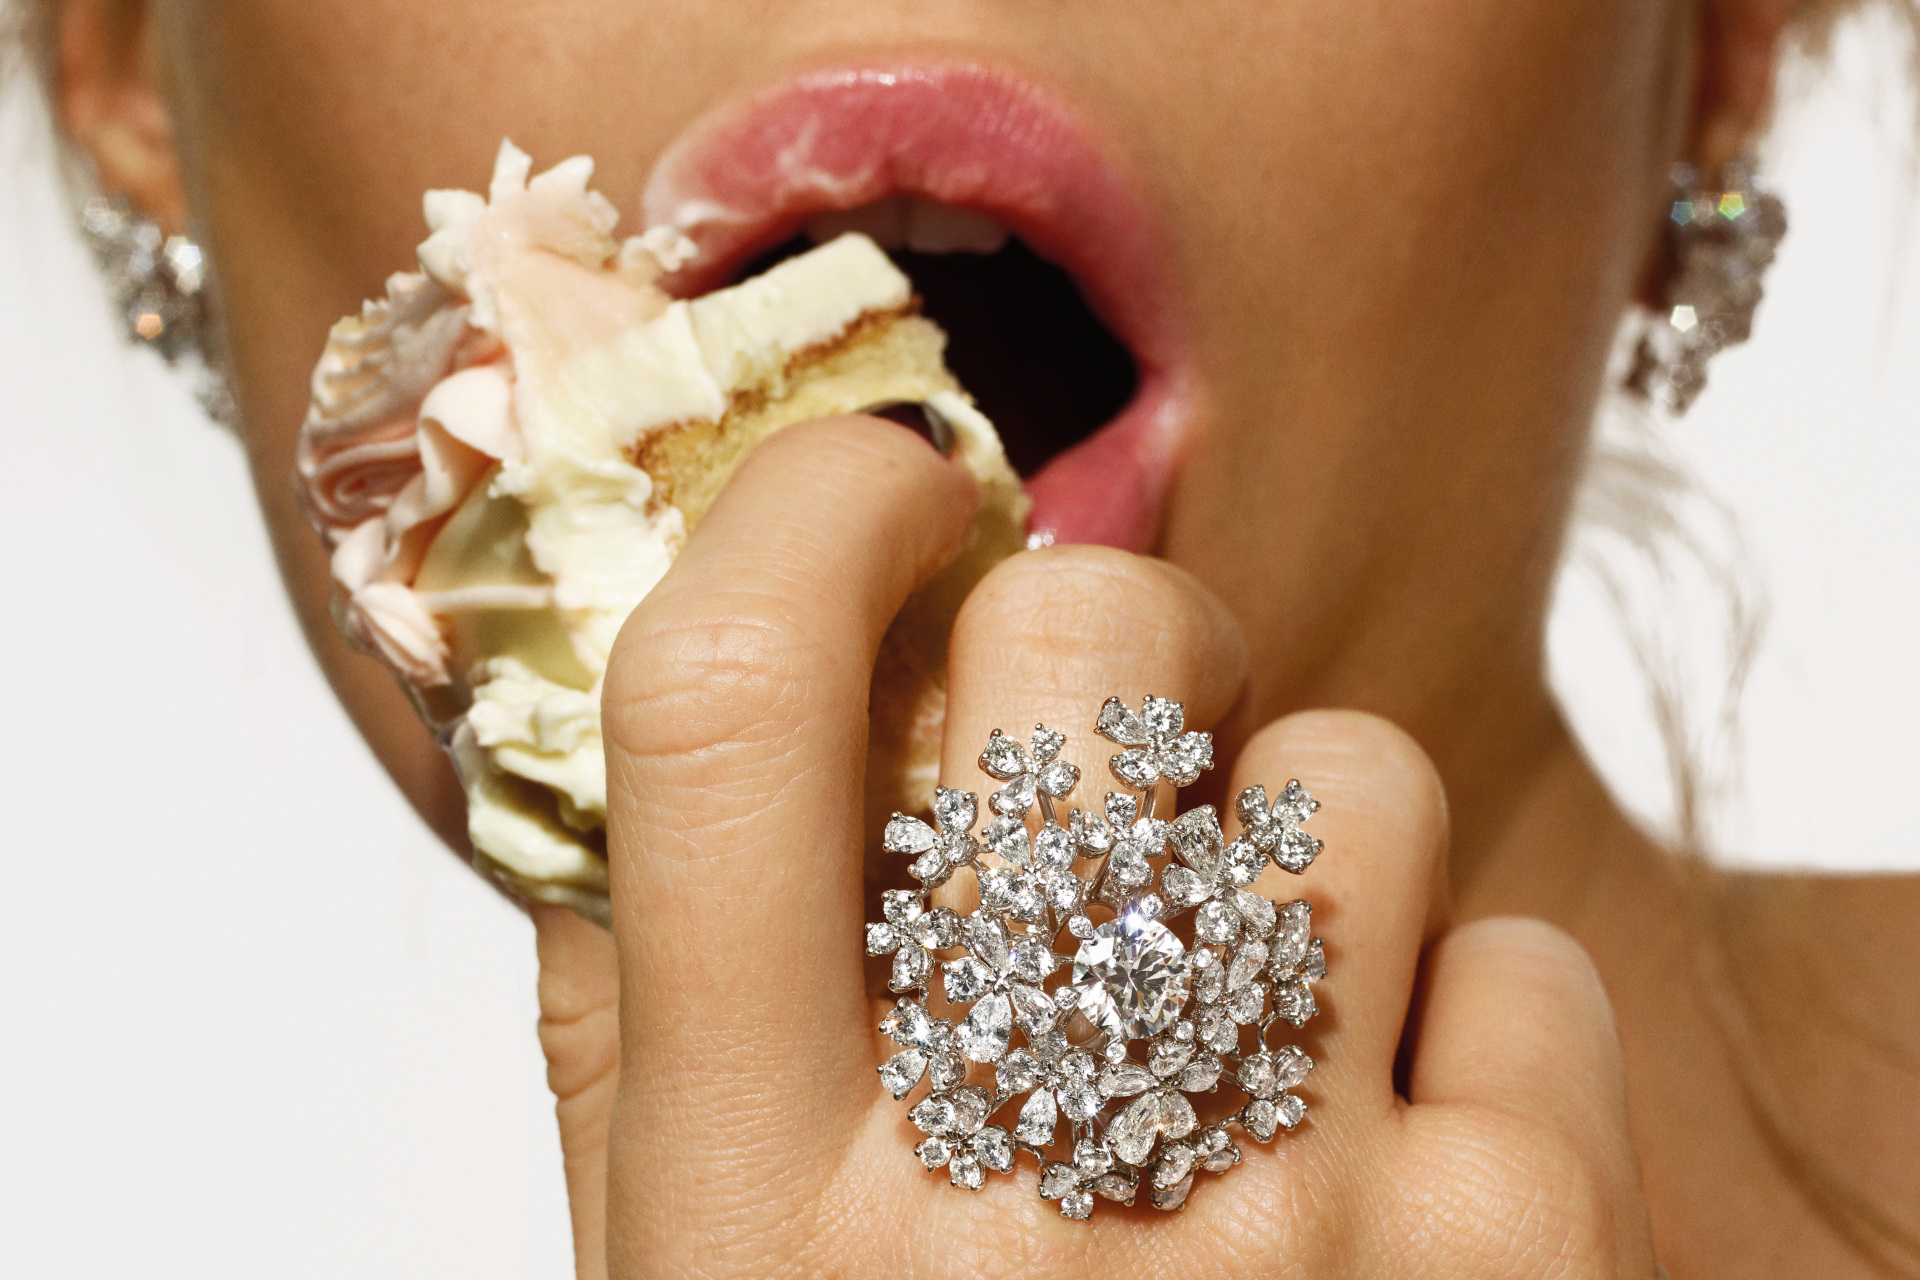 Woman eating cake with a large ring on her finger